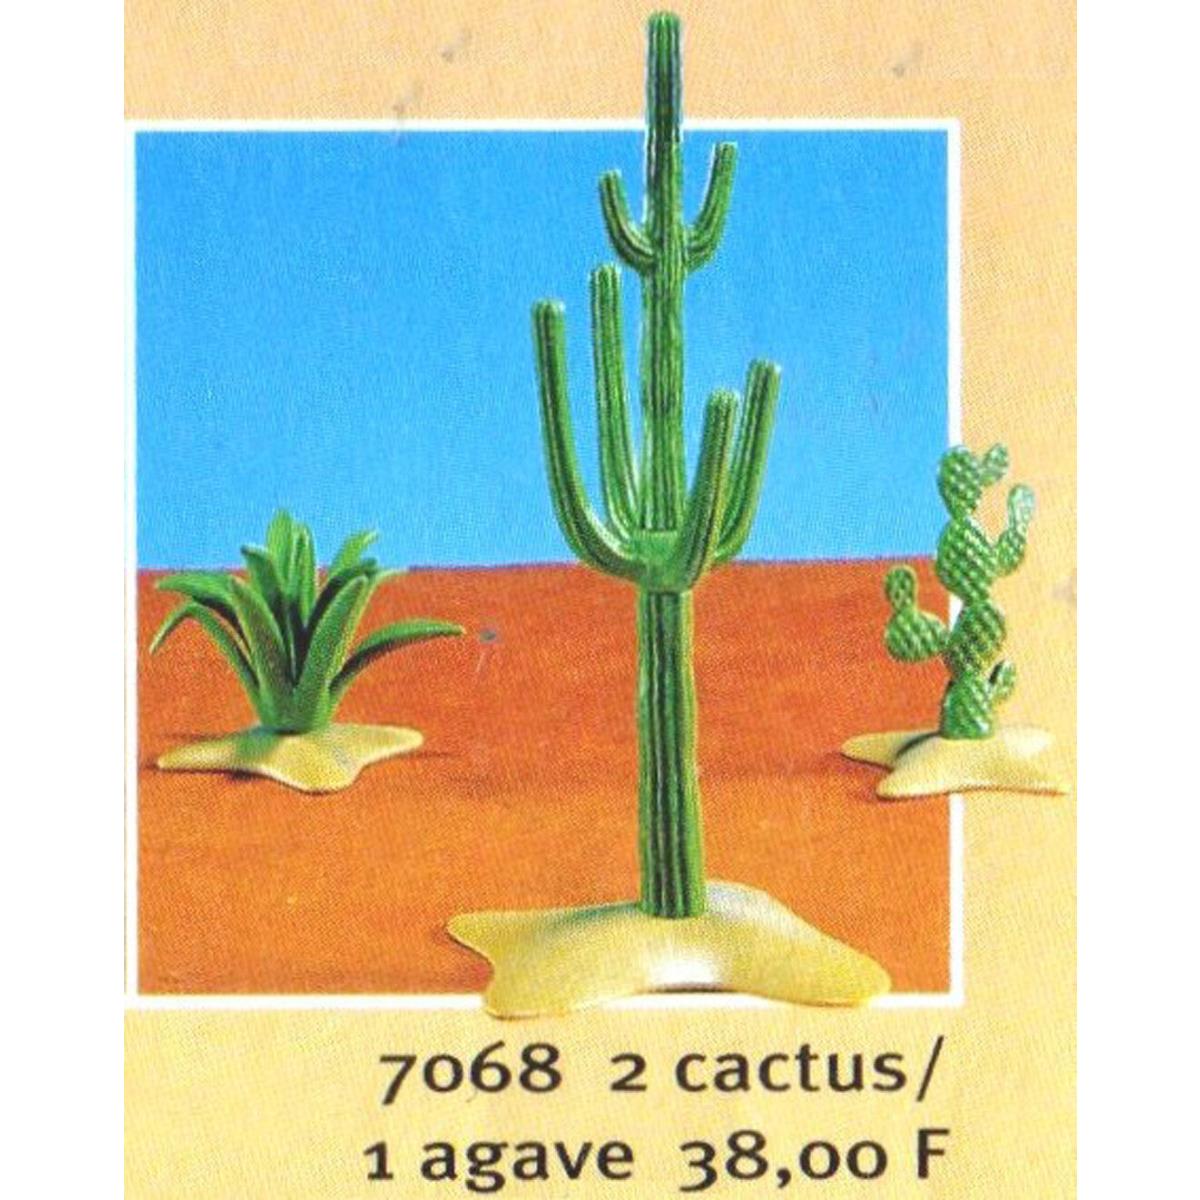 Playmobil 7068 - 3 Cacti - 4 Mint in Bag Sets - Store Stock